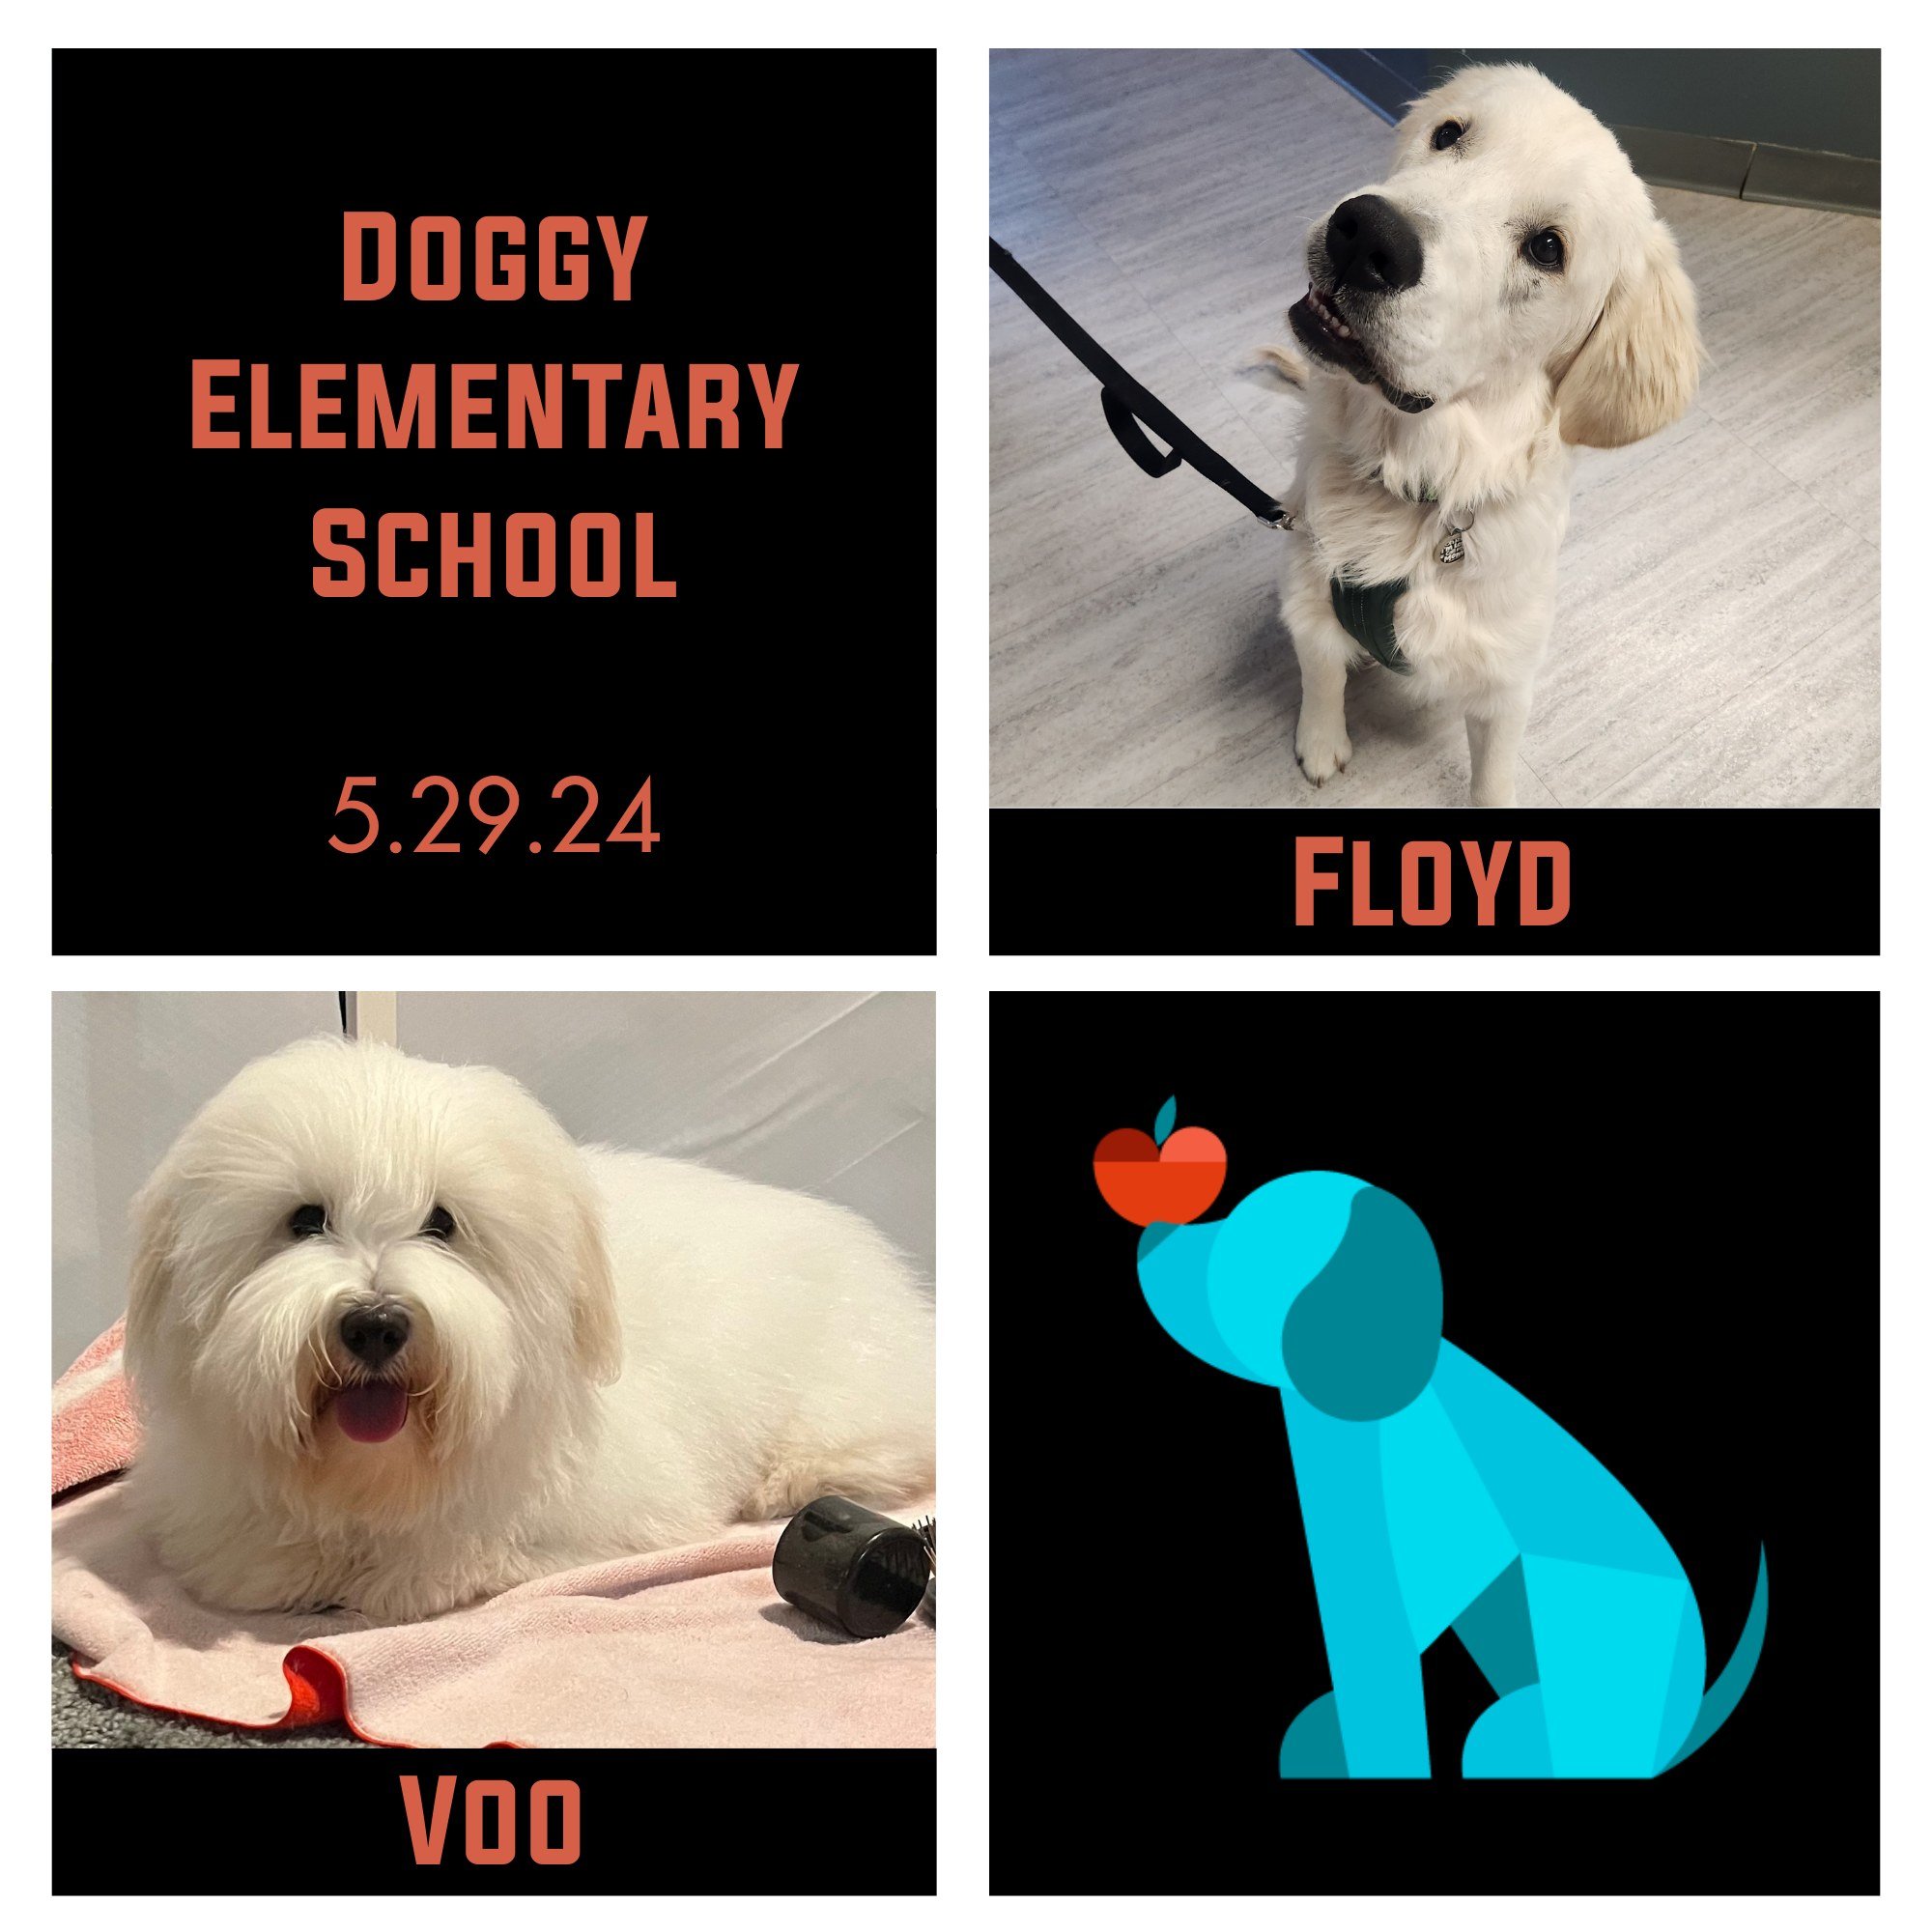 Next up, Floyd, Sophie, &amp; Voo graduated their Doggy Elementary series! Sophie &amp; Voo homeschooled for grad week but we had such a fun time with these three peppy pups. They really enjoyed each others' company and did an excellent job working a